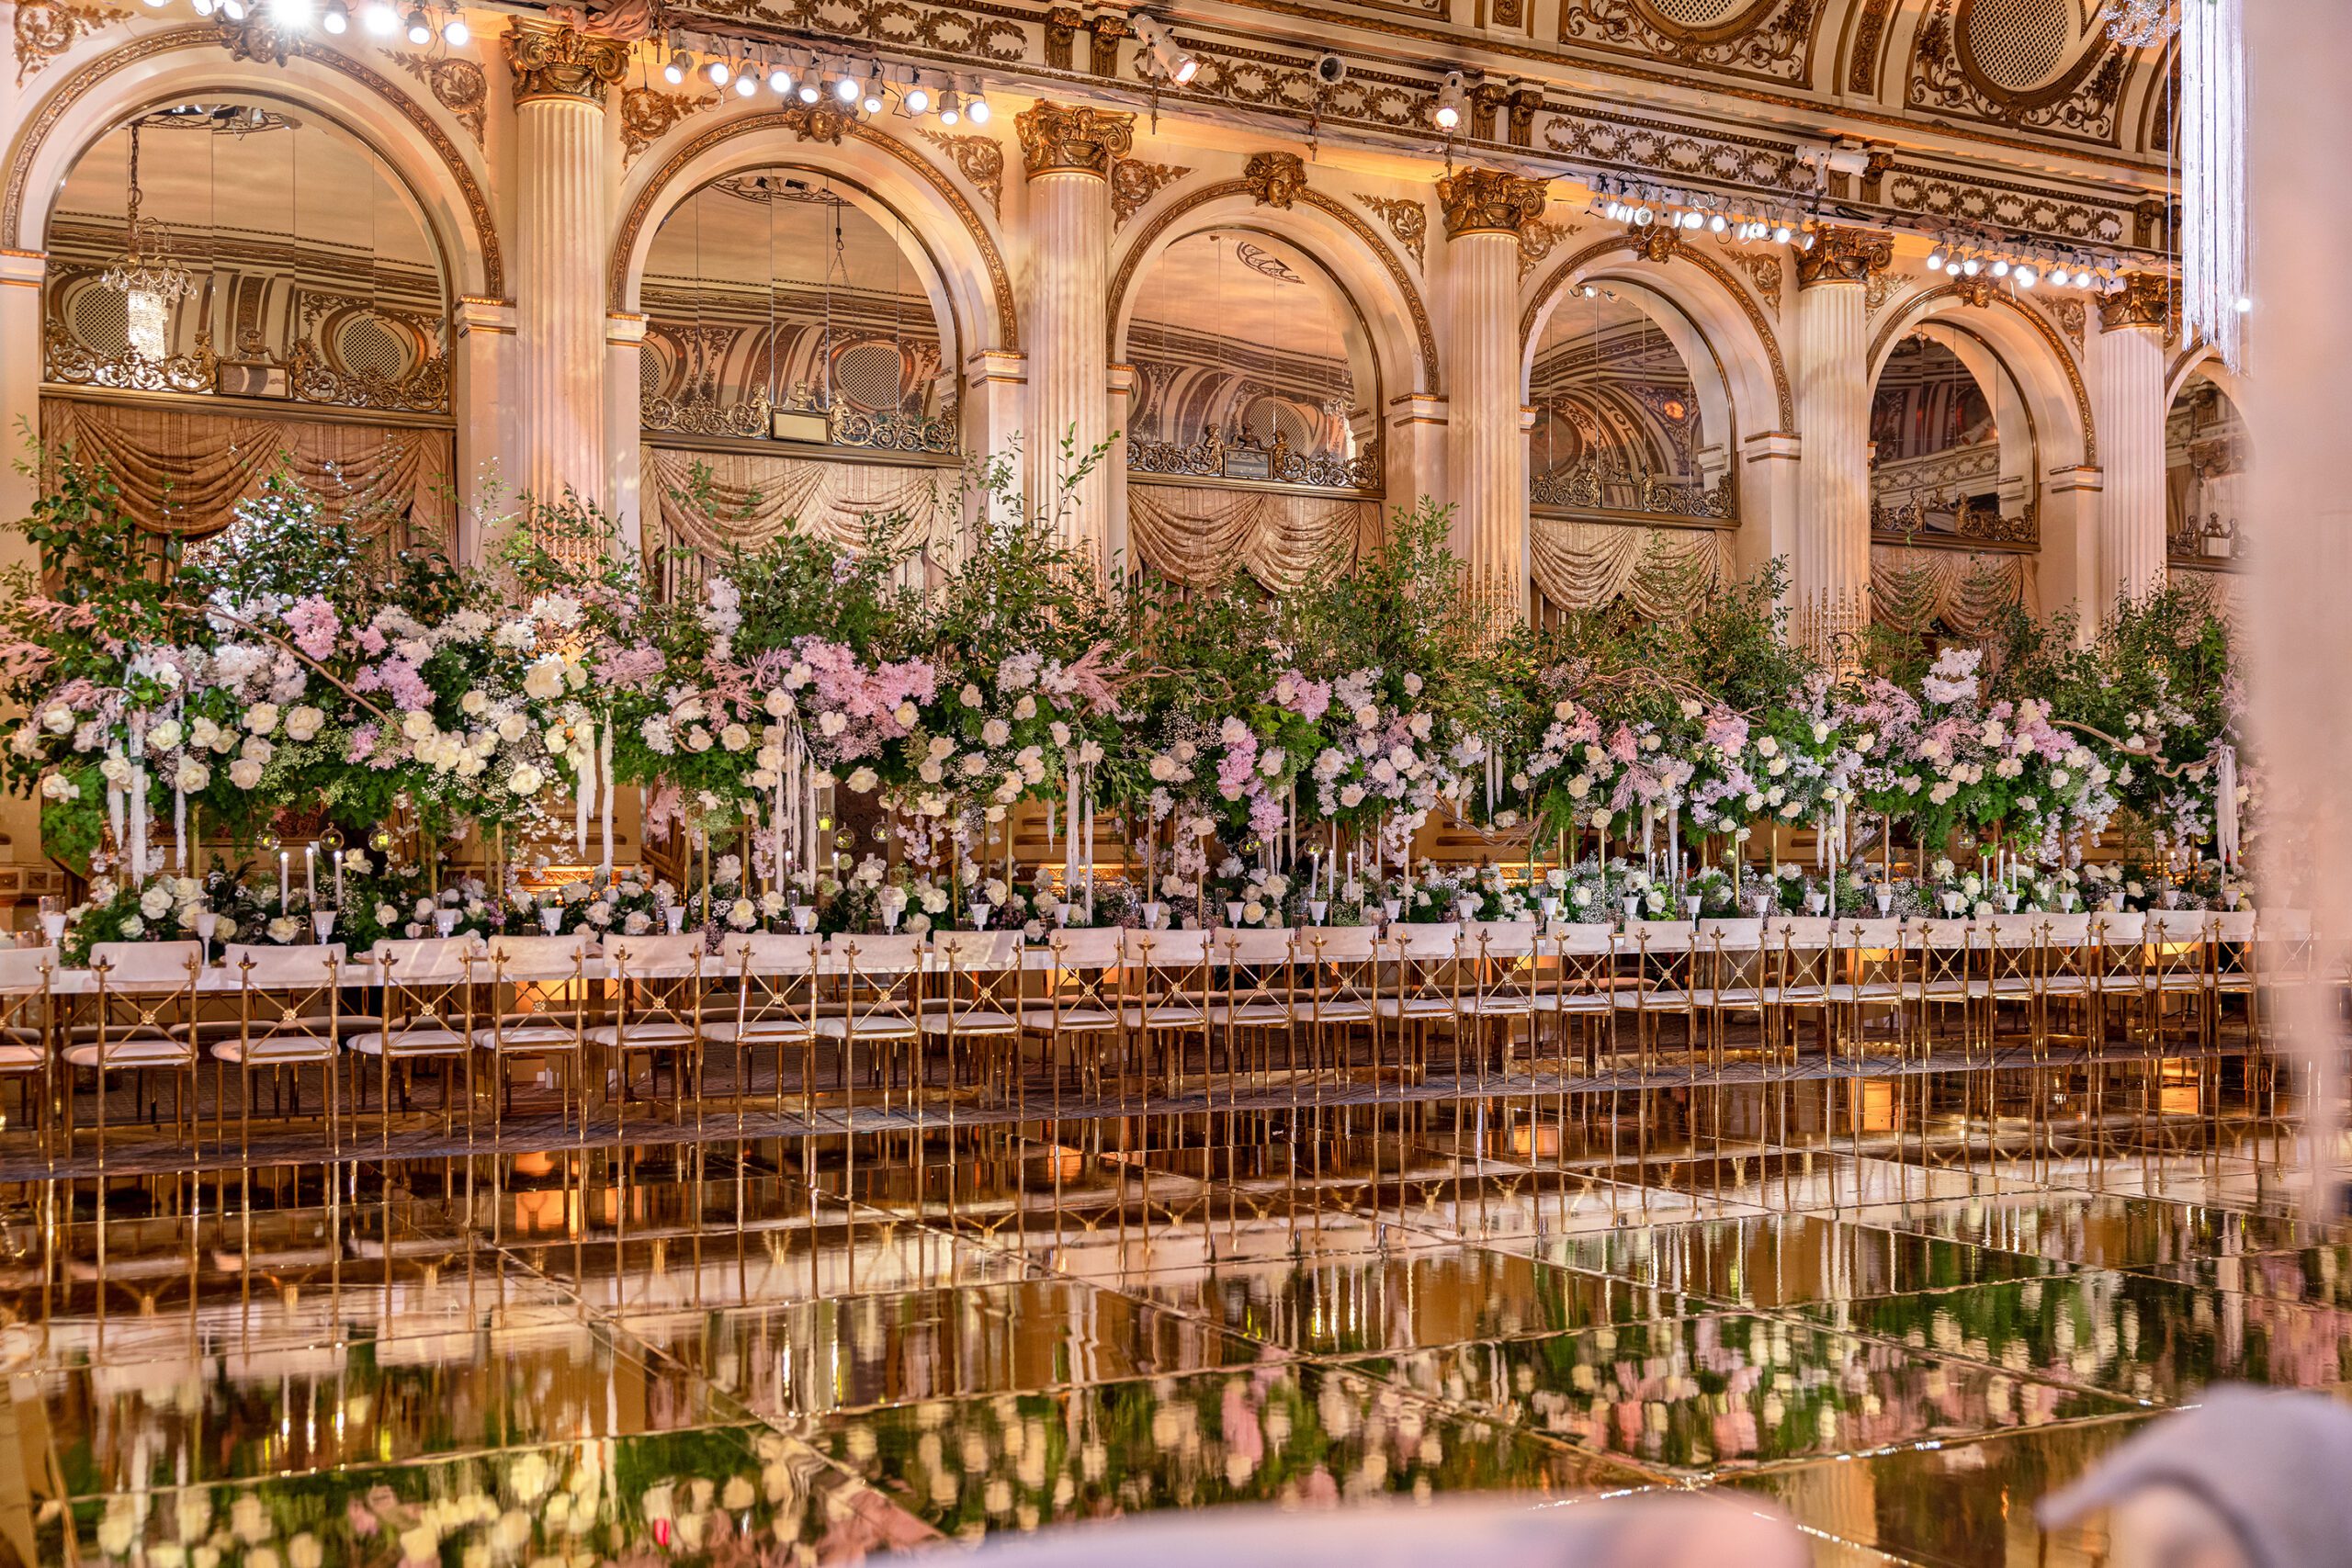 Elegant wedding reception hall adorned with long tables set with white linens, surrounded by abundant floral arrangements crafted by a luxury wedding florist, reflective gold floors, and ornate architectural details.